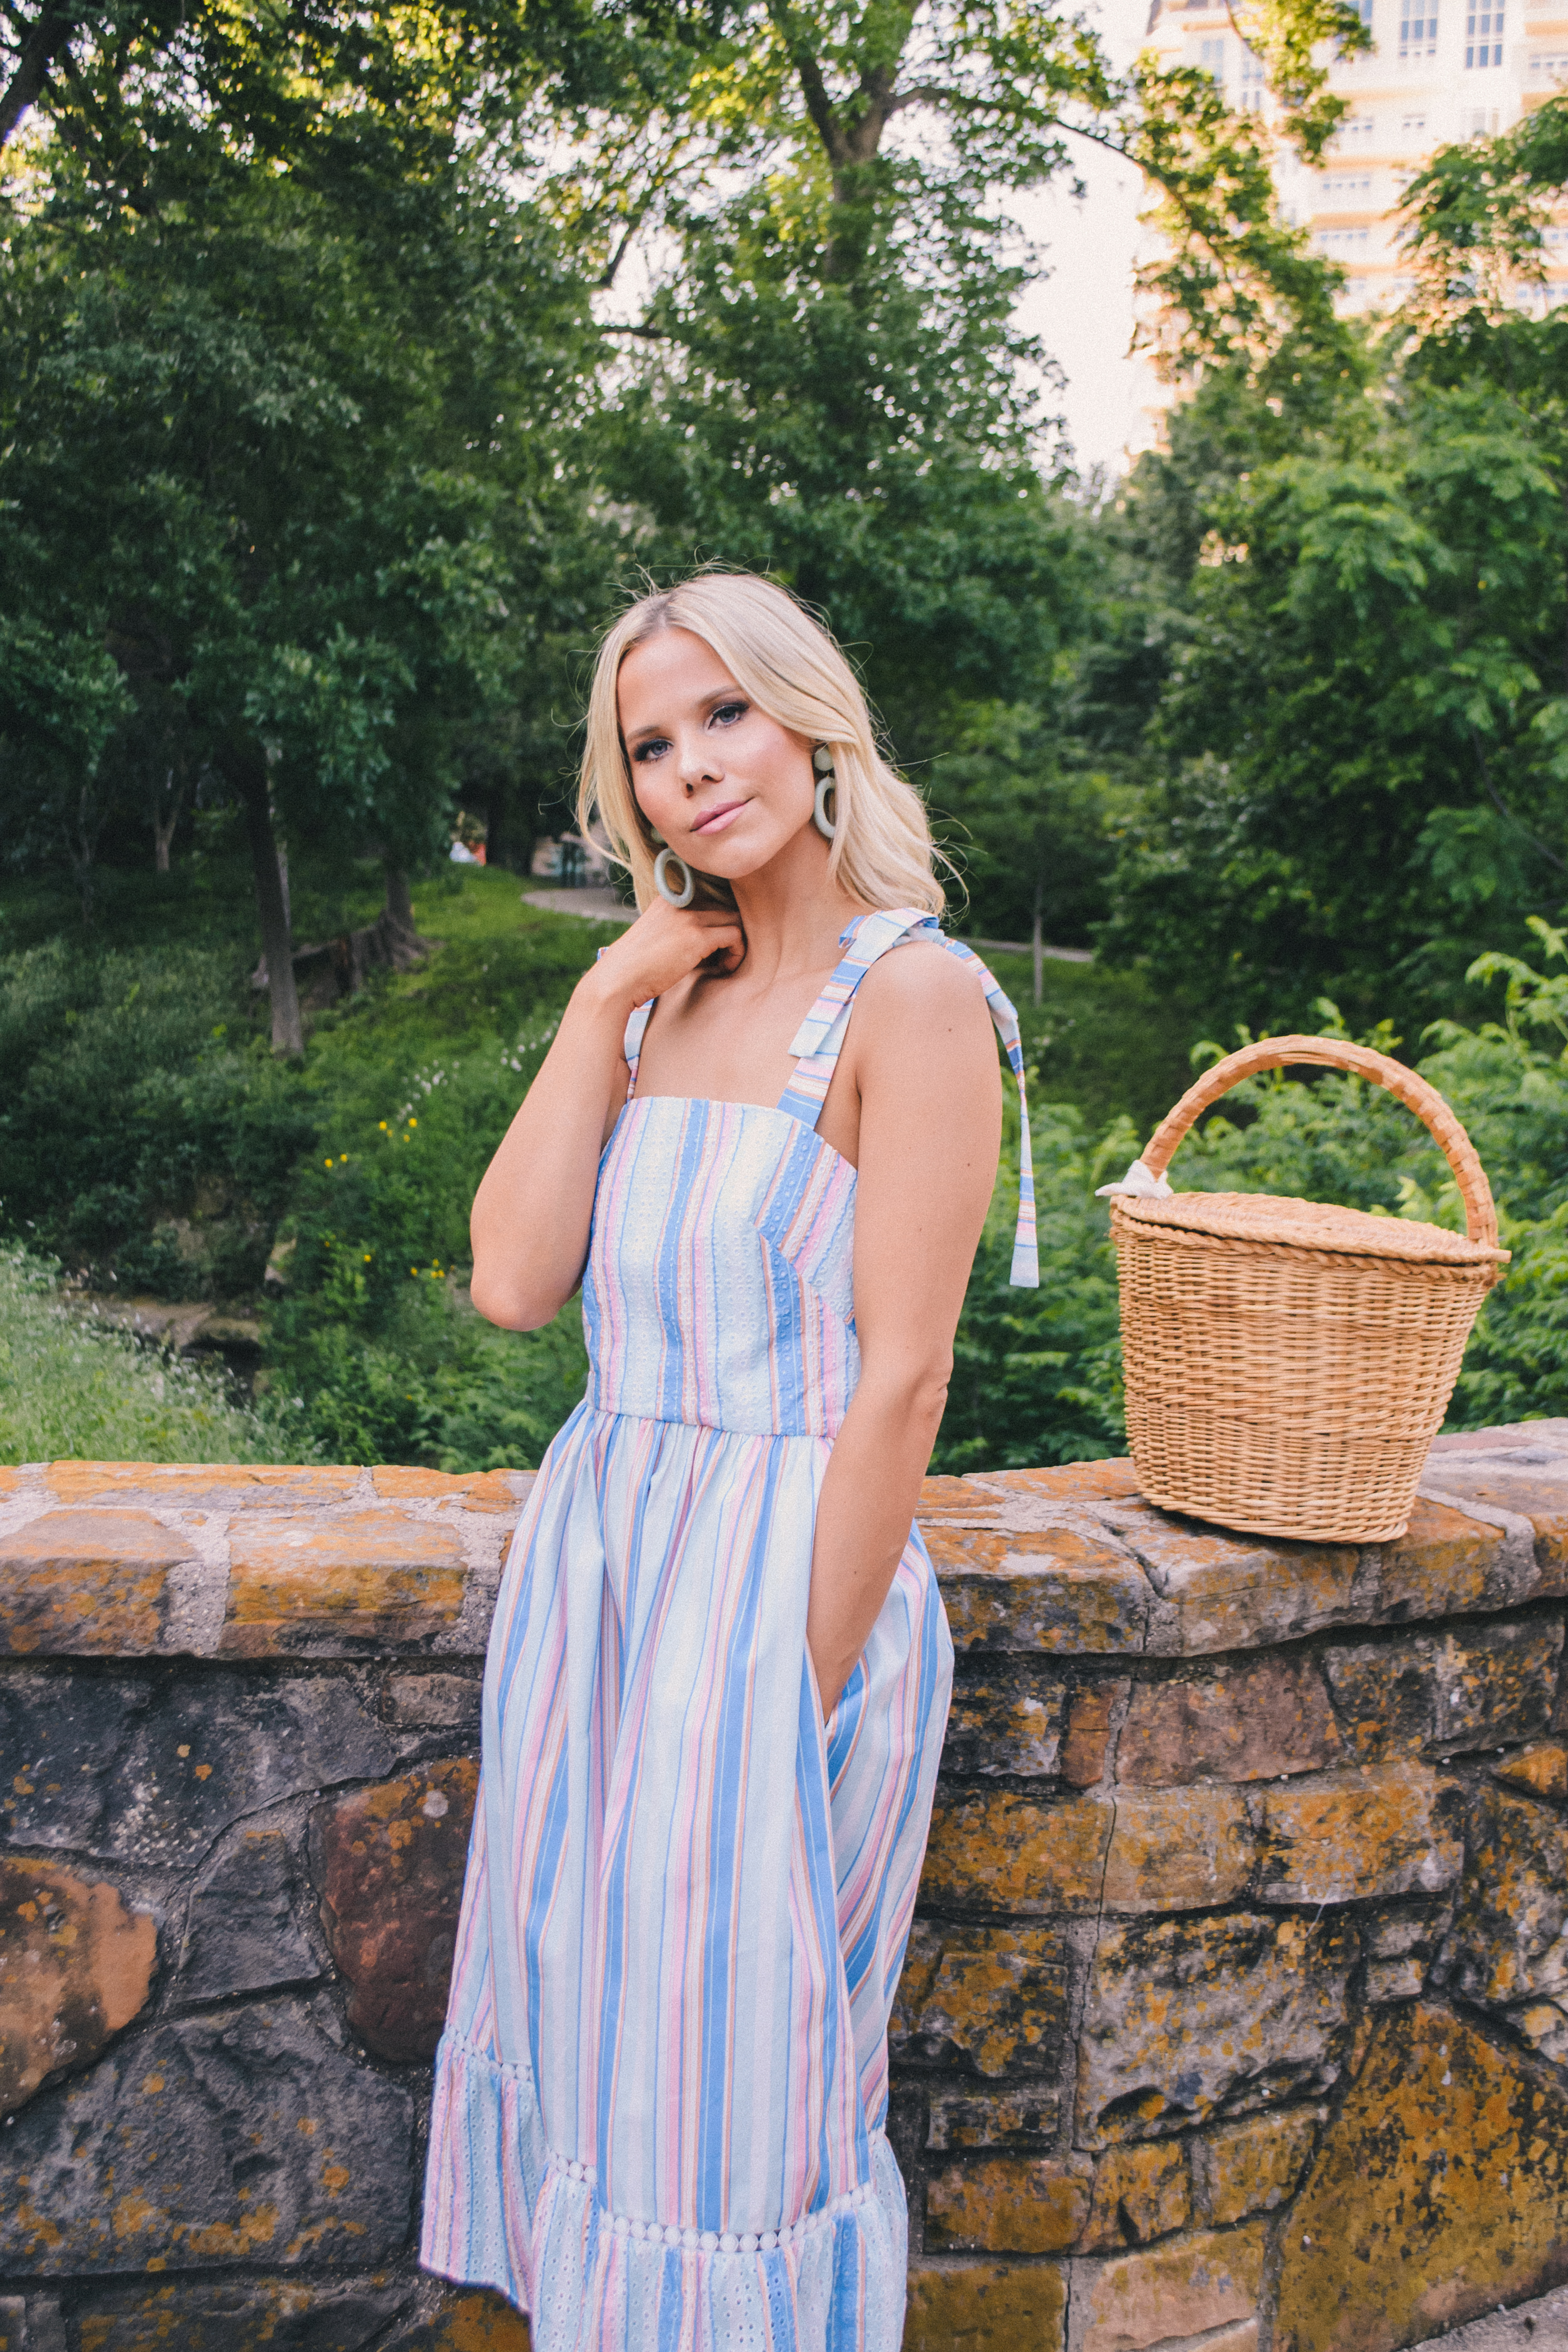 Striped Maxi Dress Shoshanna, maxi dress for a picnic, summer outfit, summer style, picnic outfit, glam life living, Hannah McDonnell #picnic #maxidress